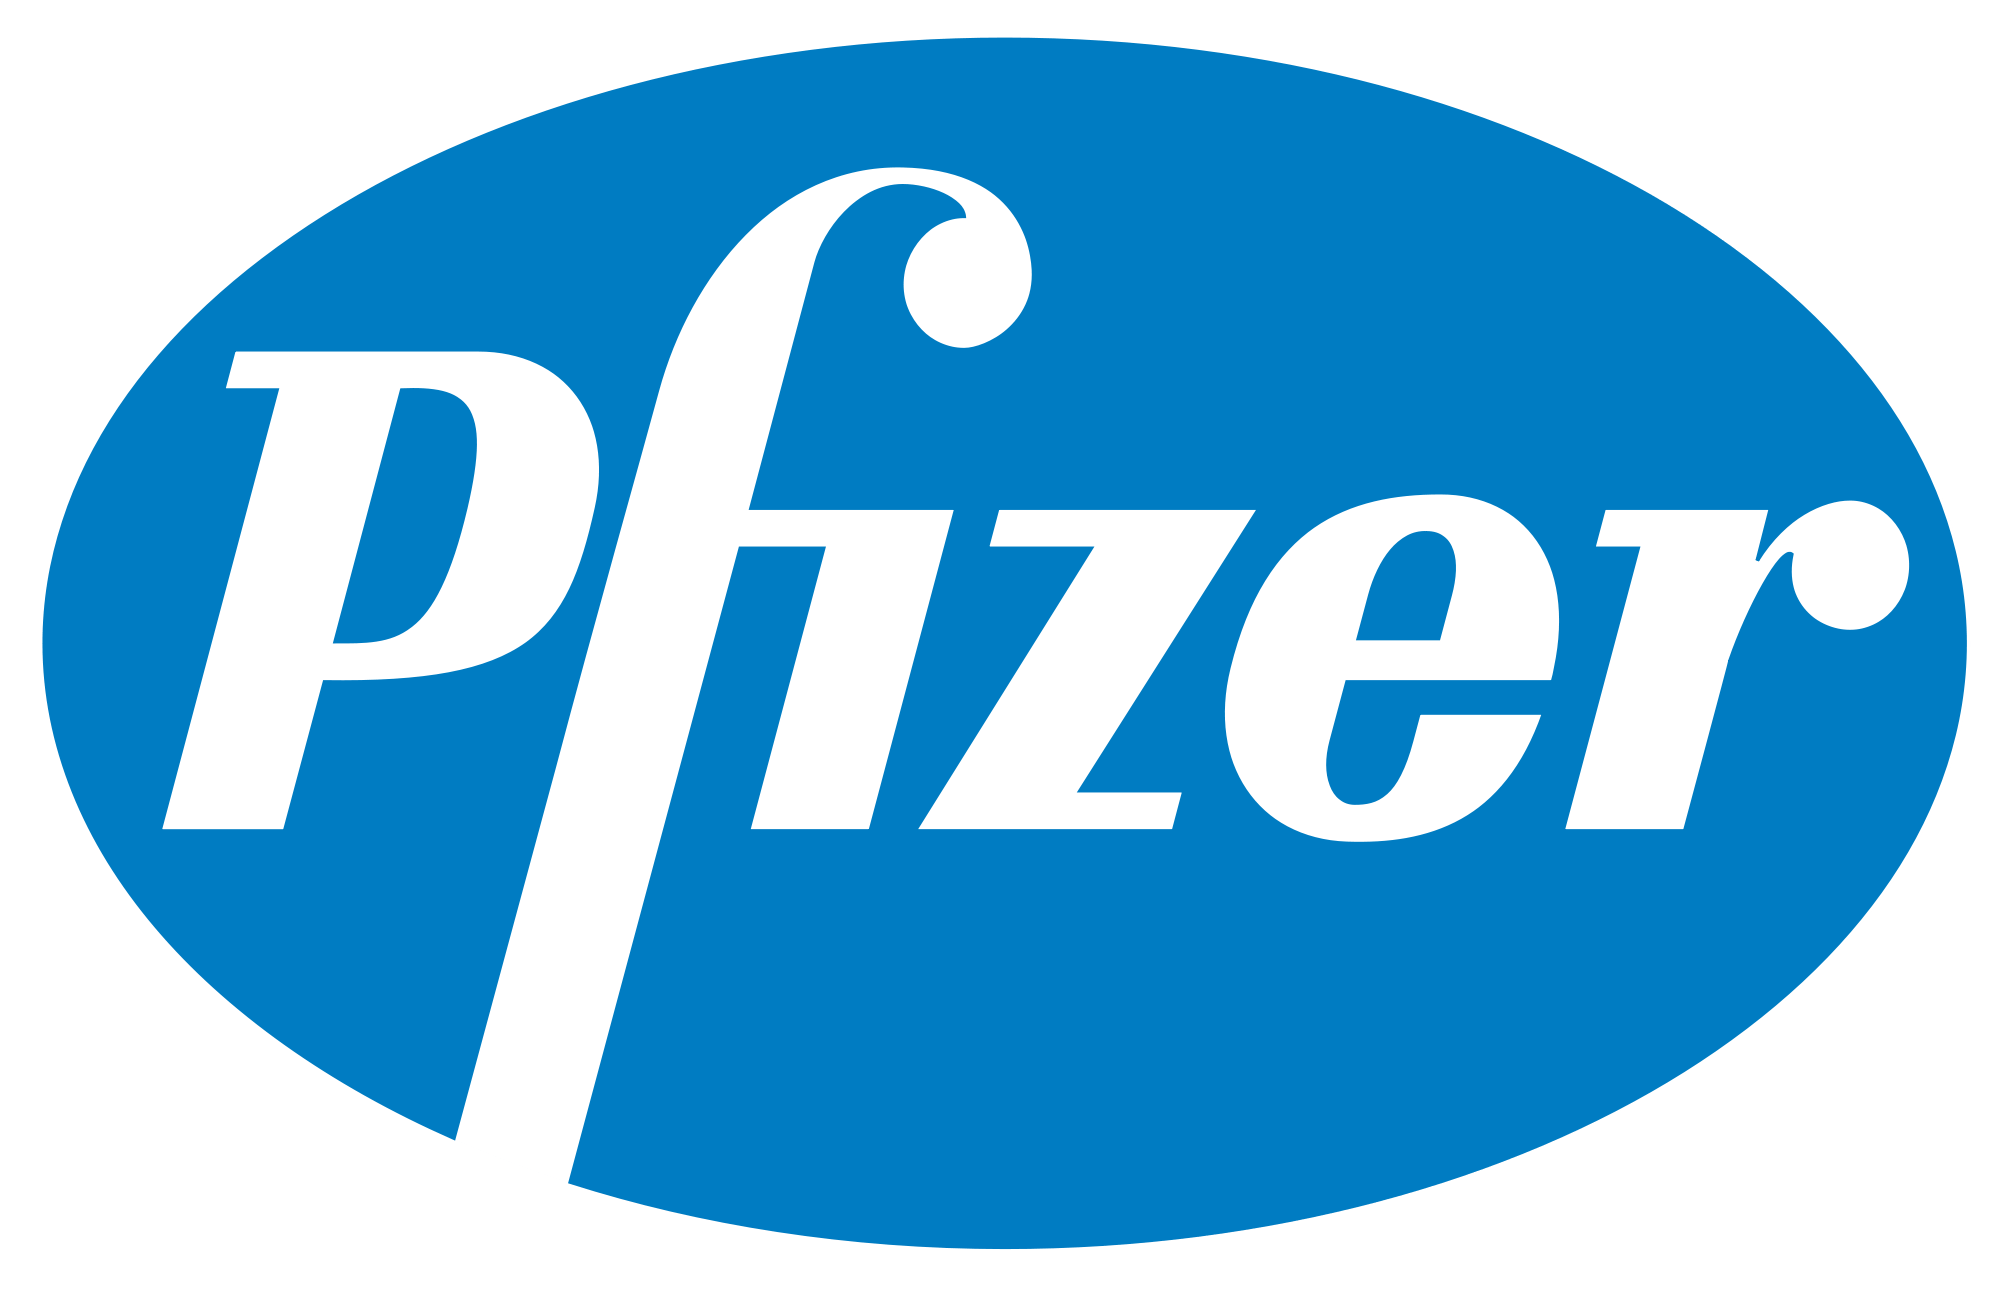 Pfizer Marks 60 Years in Nigeria With New UltraModern Office